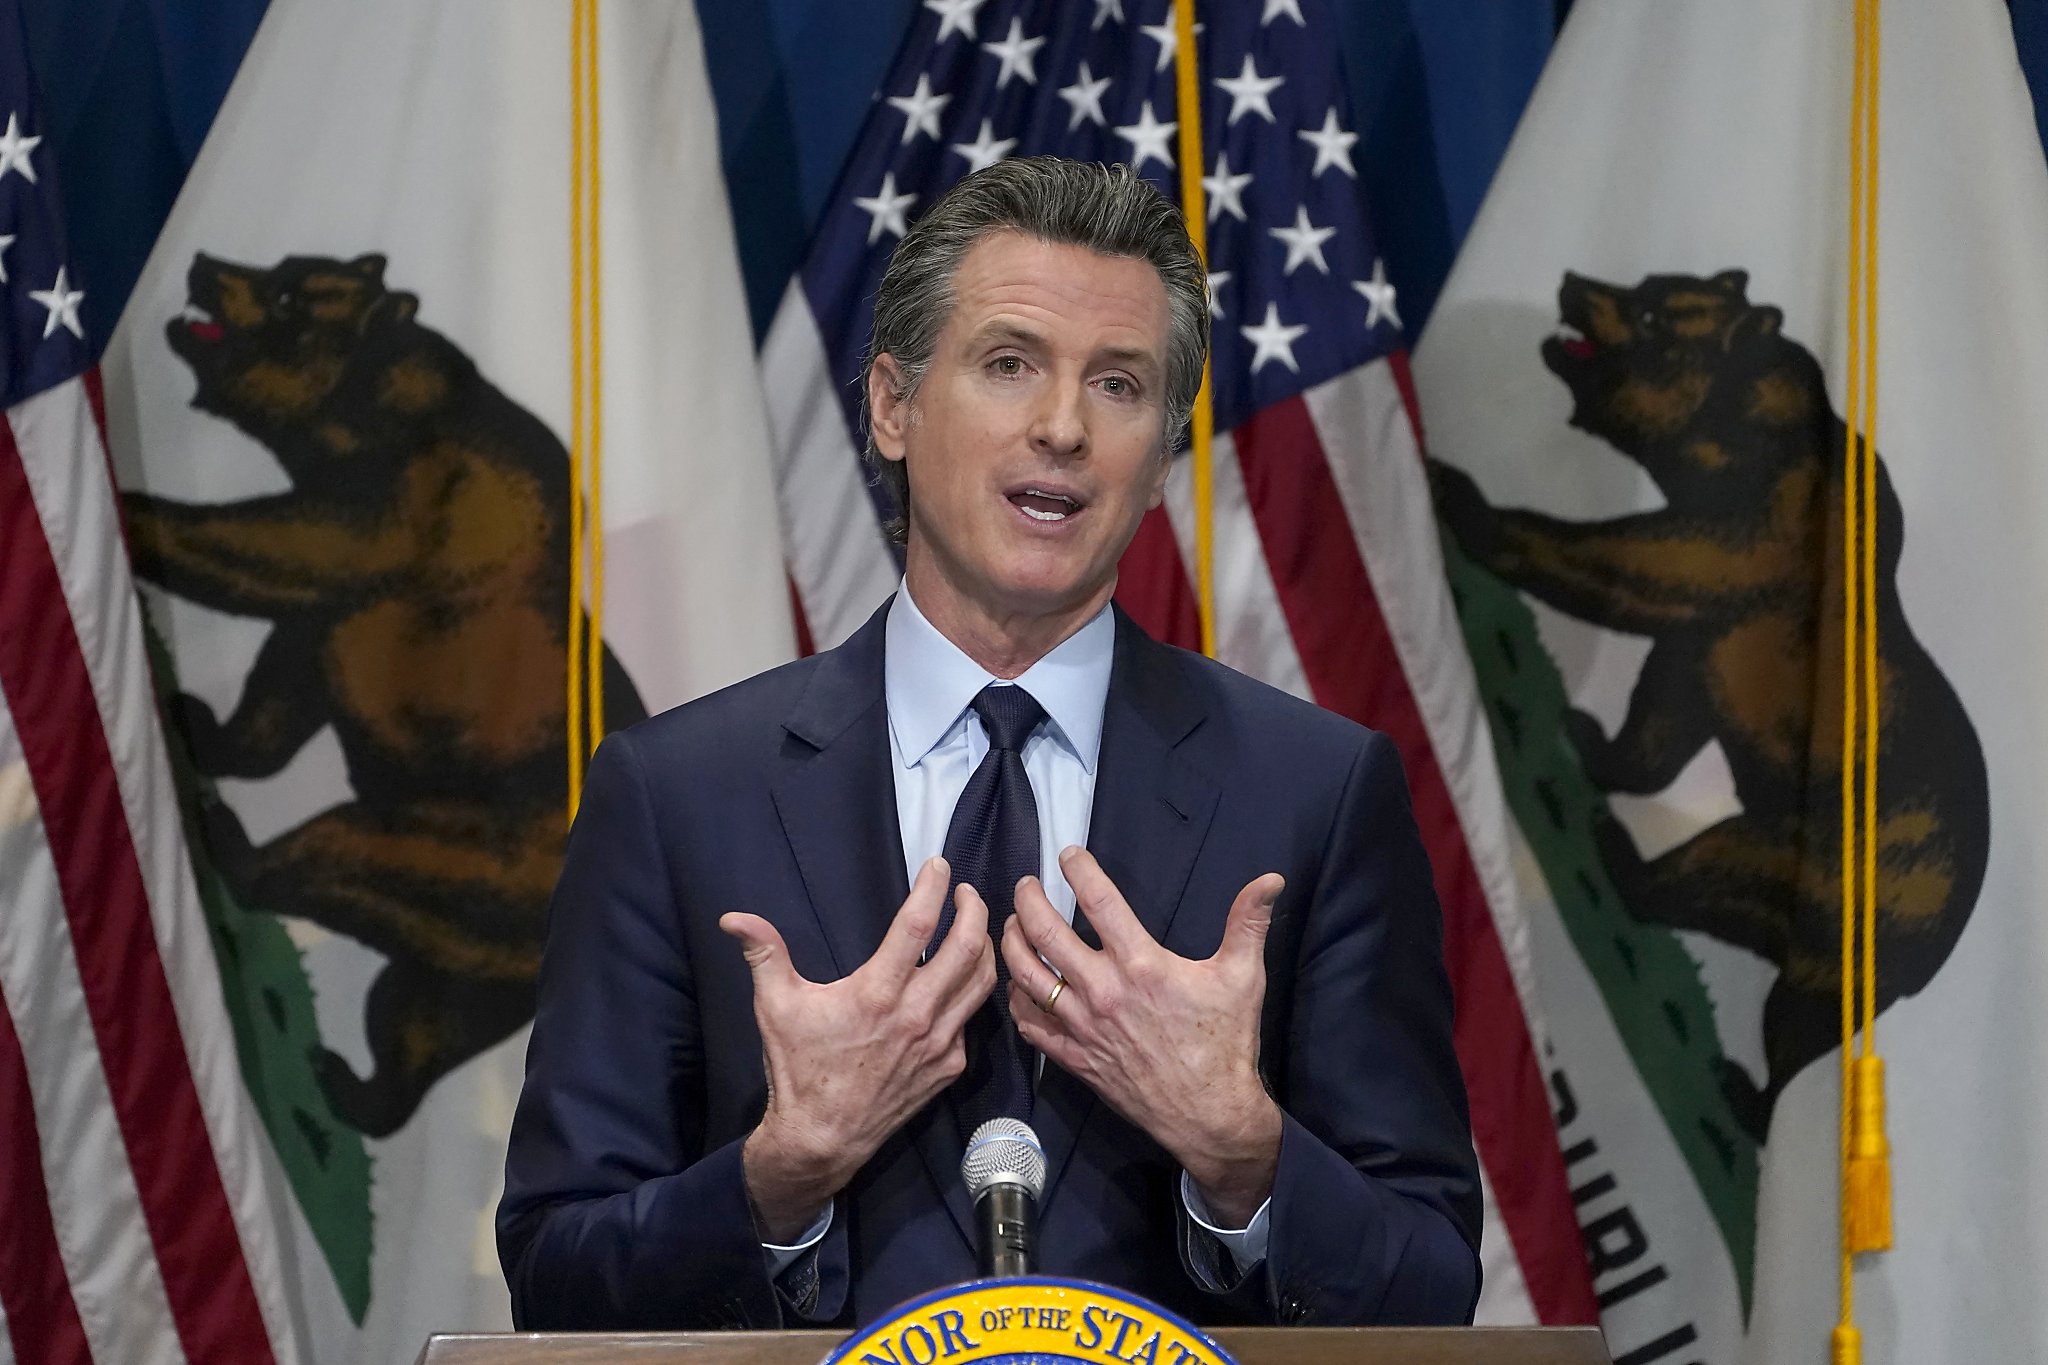 California well below Newsom’s goal of 1 million vaccinations in 10 days